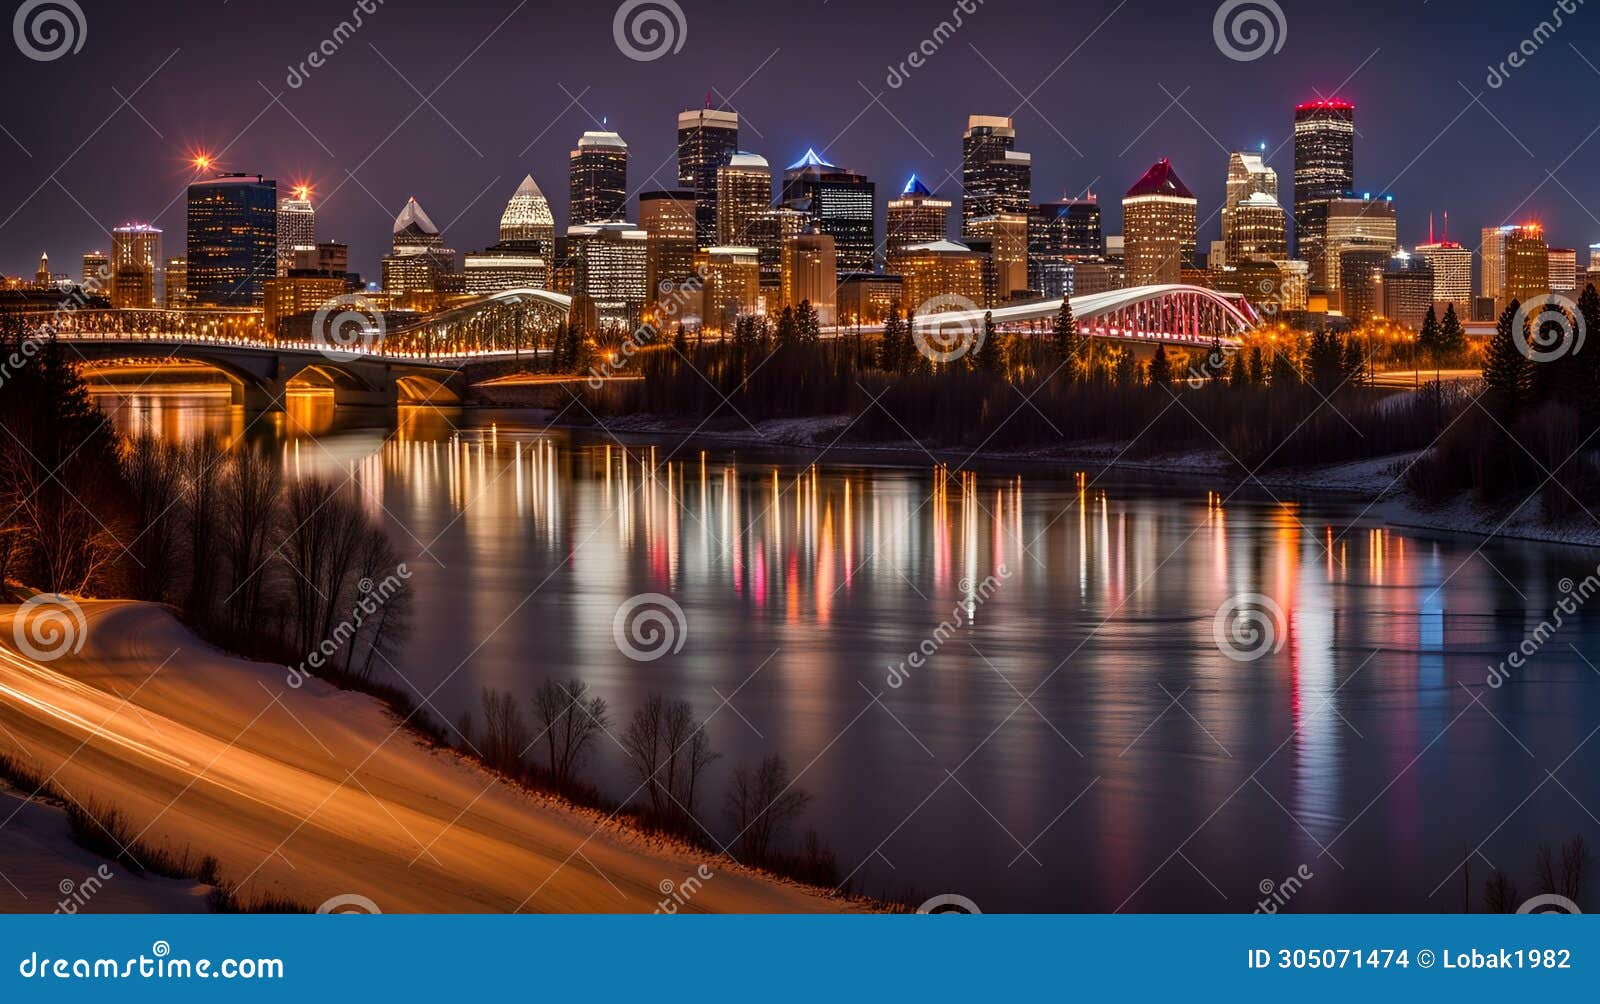 calgary skyline at night with bow river and centre street bridge